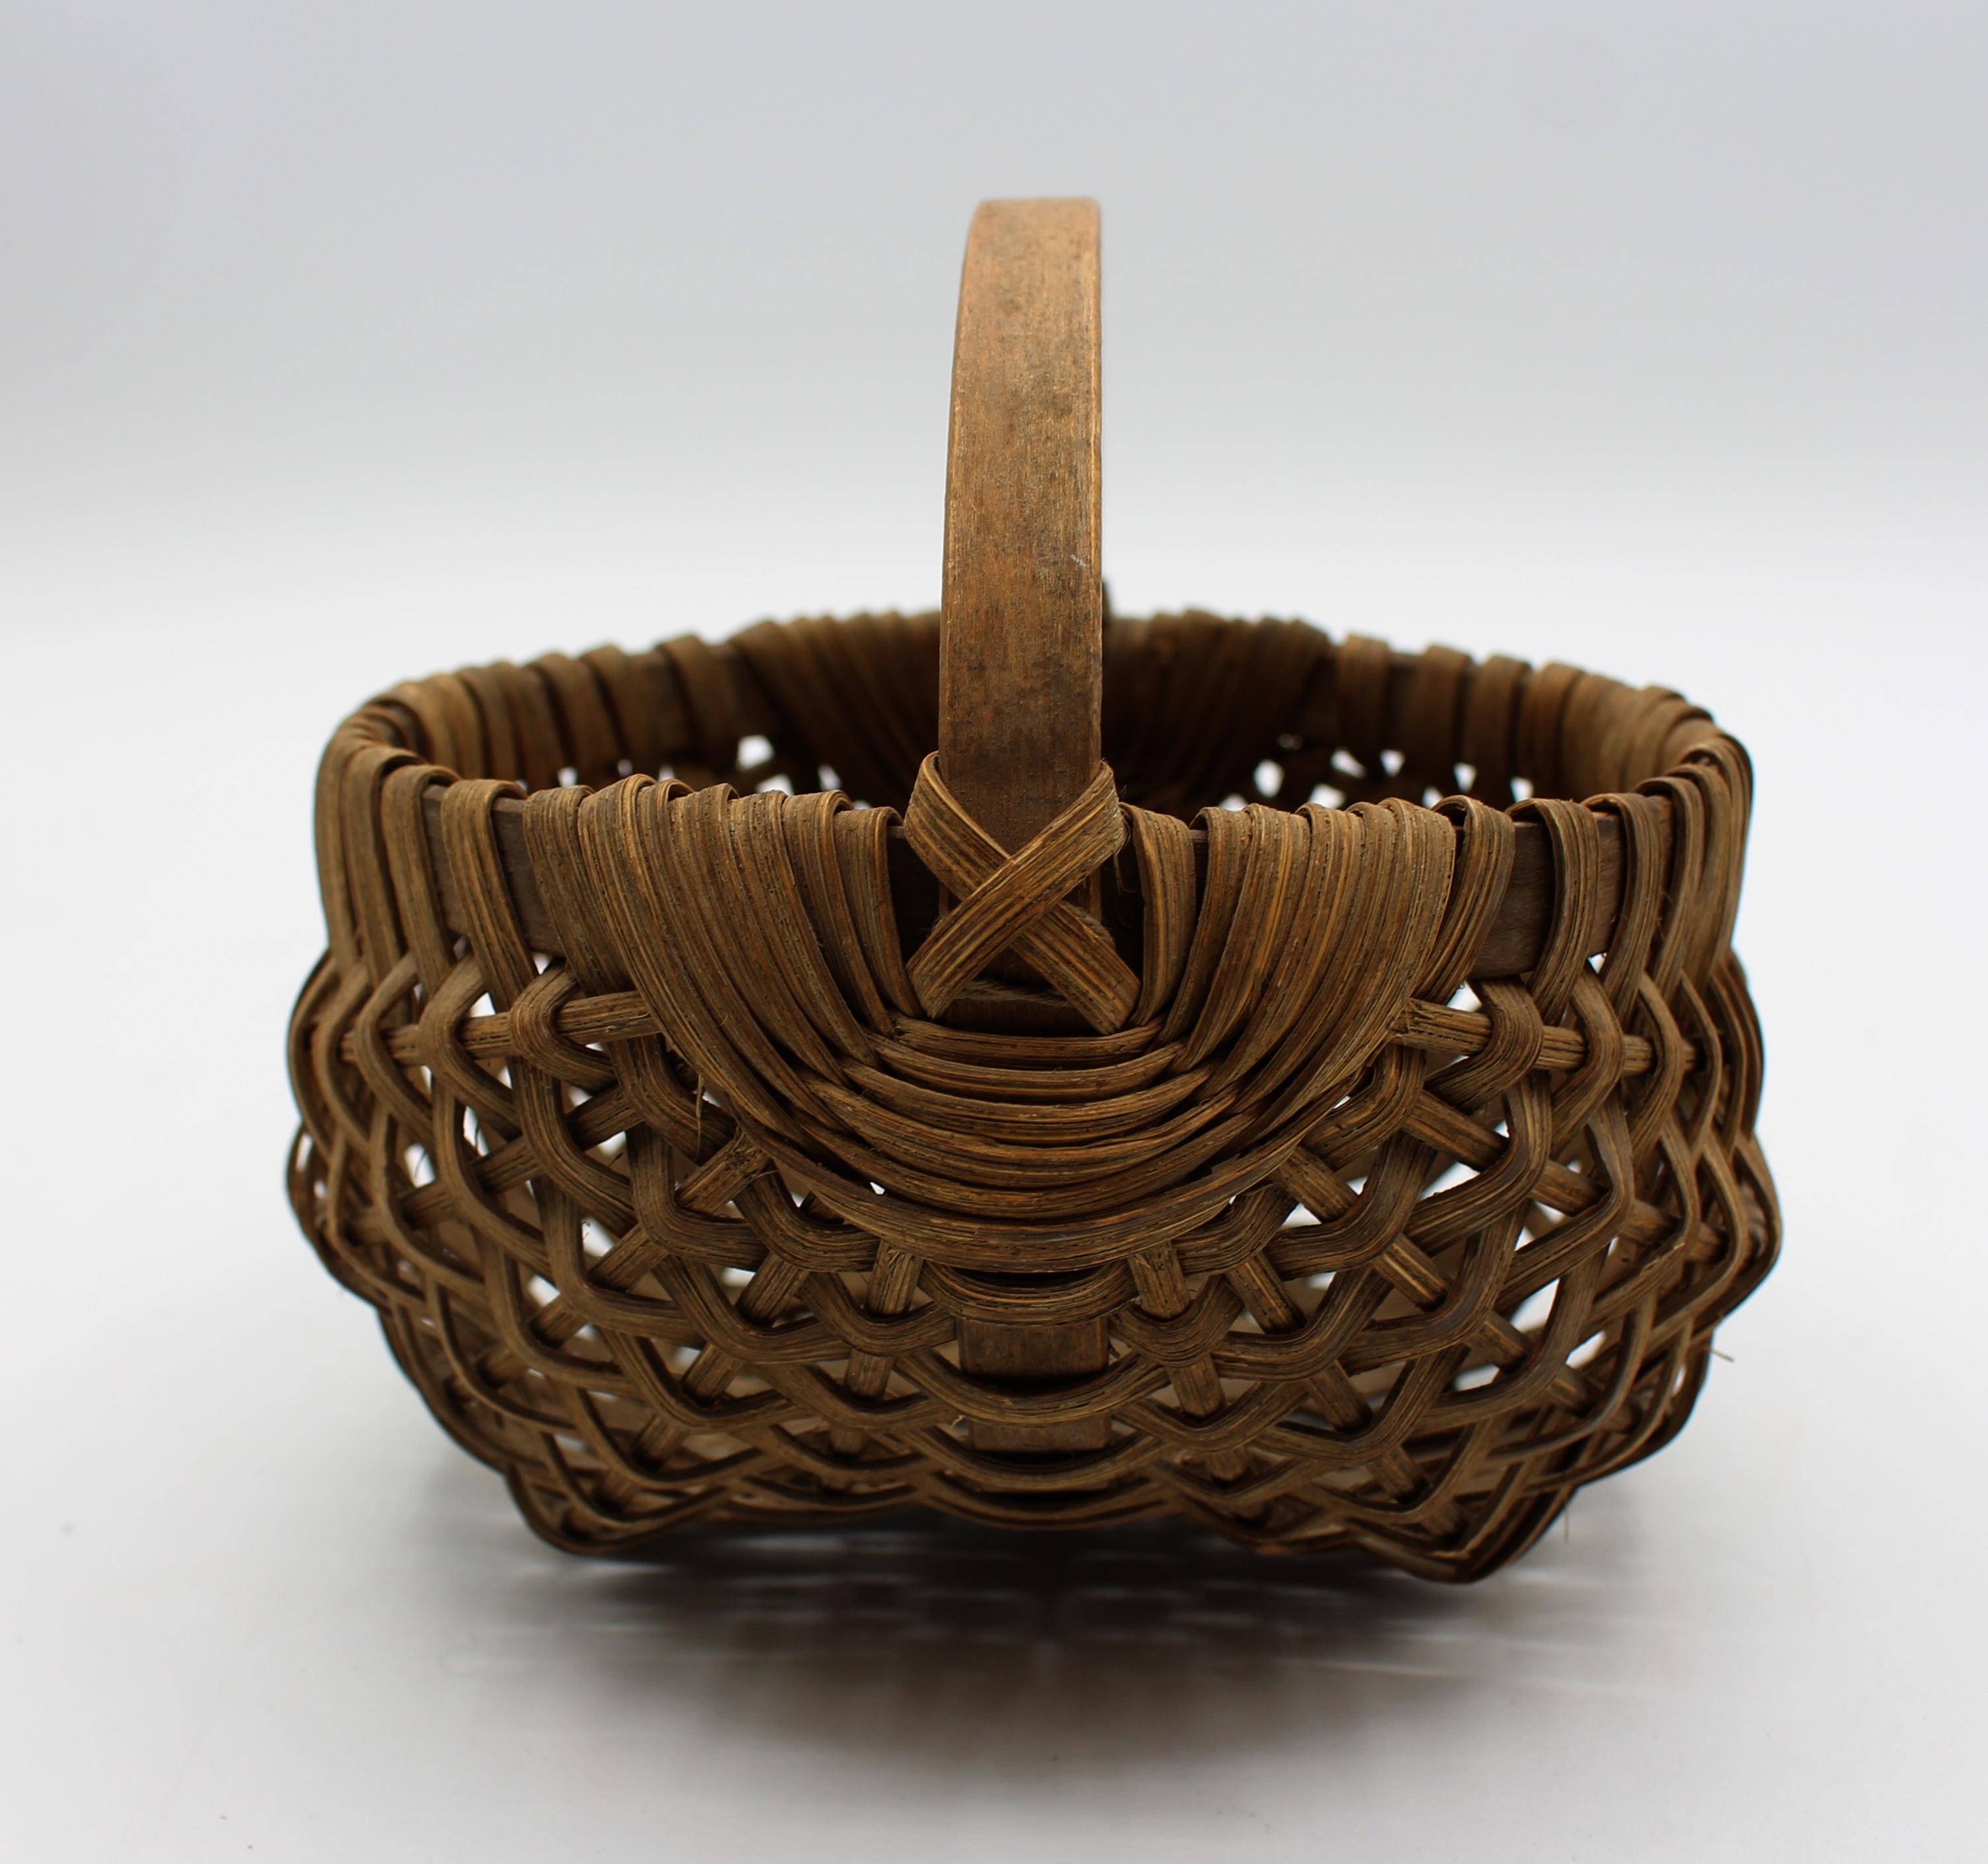 Late 19th century woven double shape basket, American. Superbly made. Note the exceptional woven design around the handle drops. 3.25